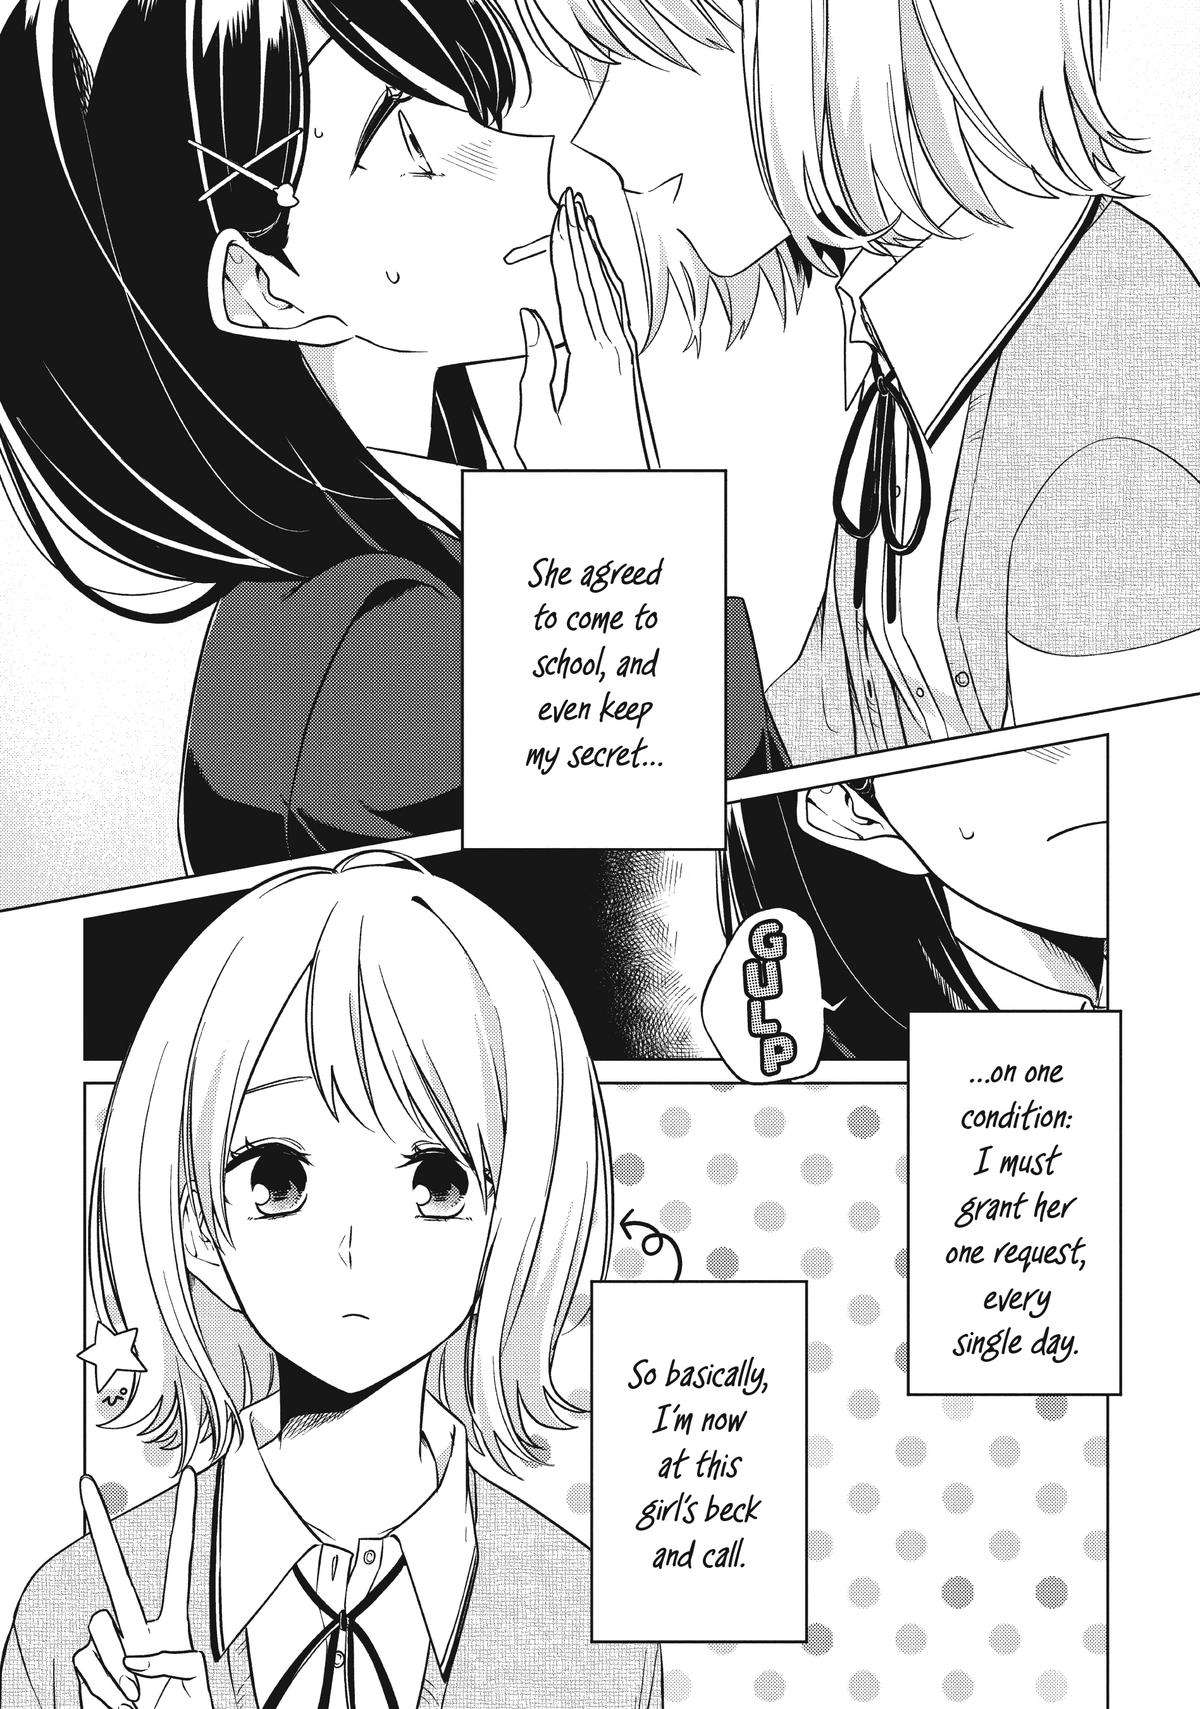 I Can’t Say No to the Lonely Girl - chapter 2 - #2